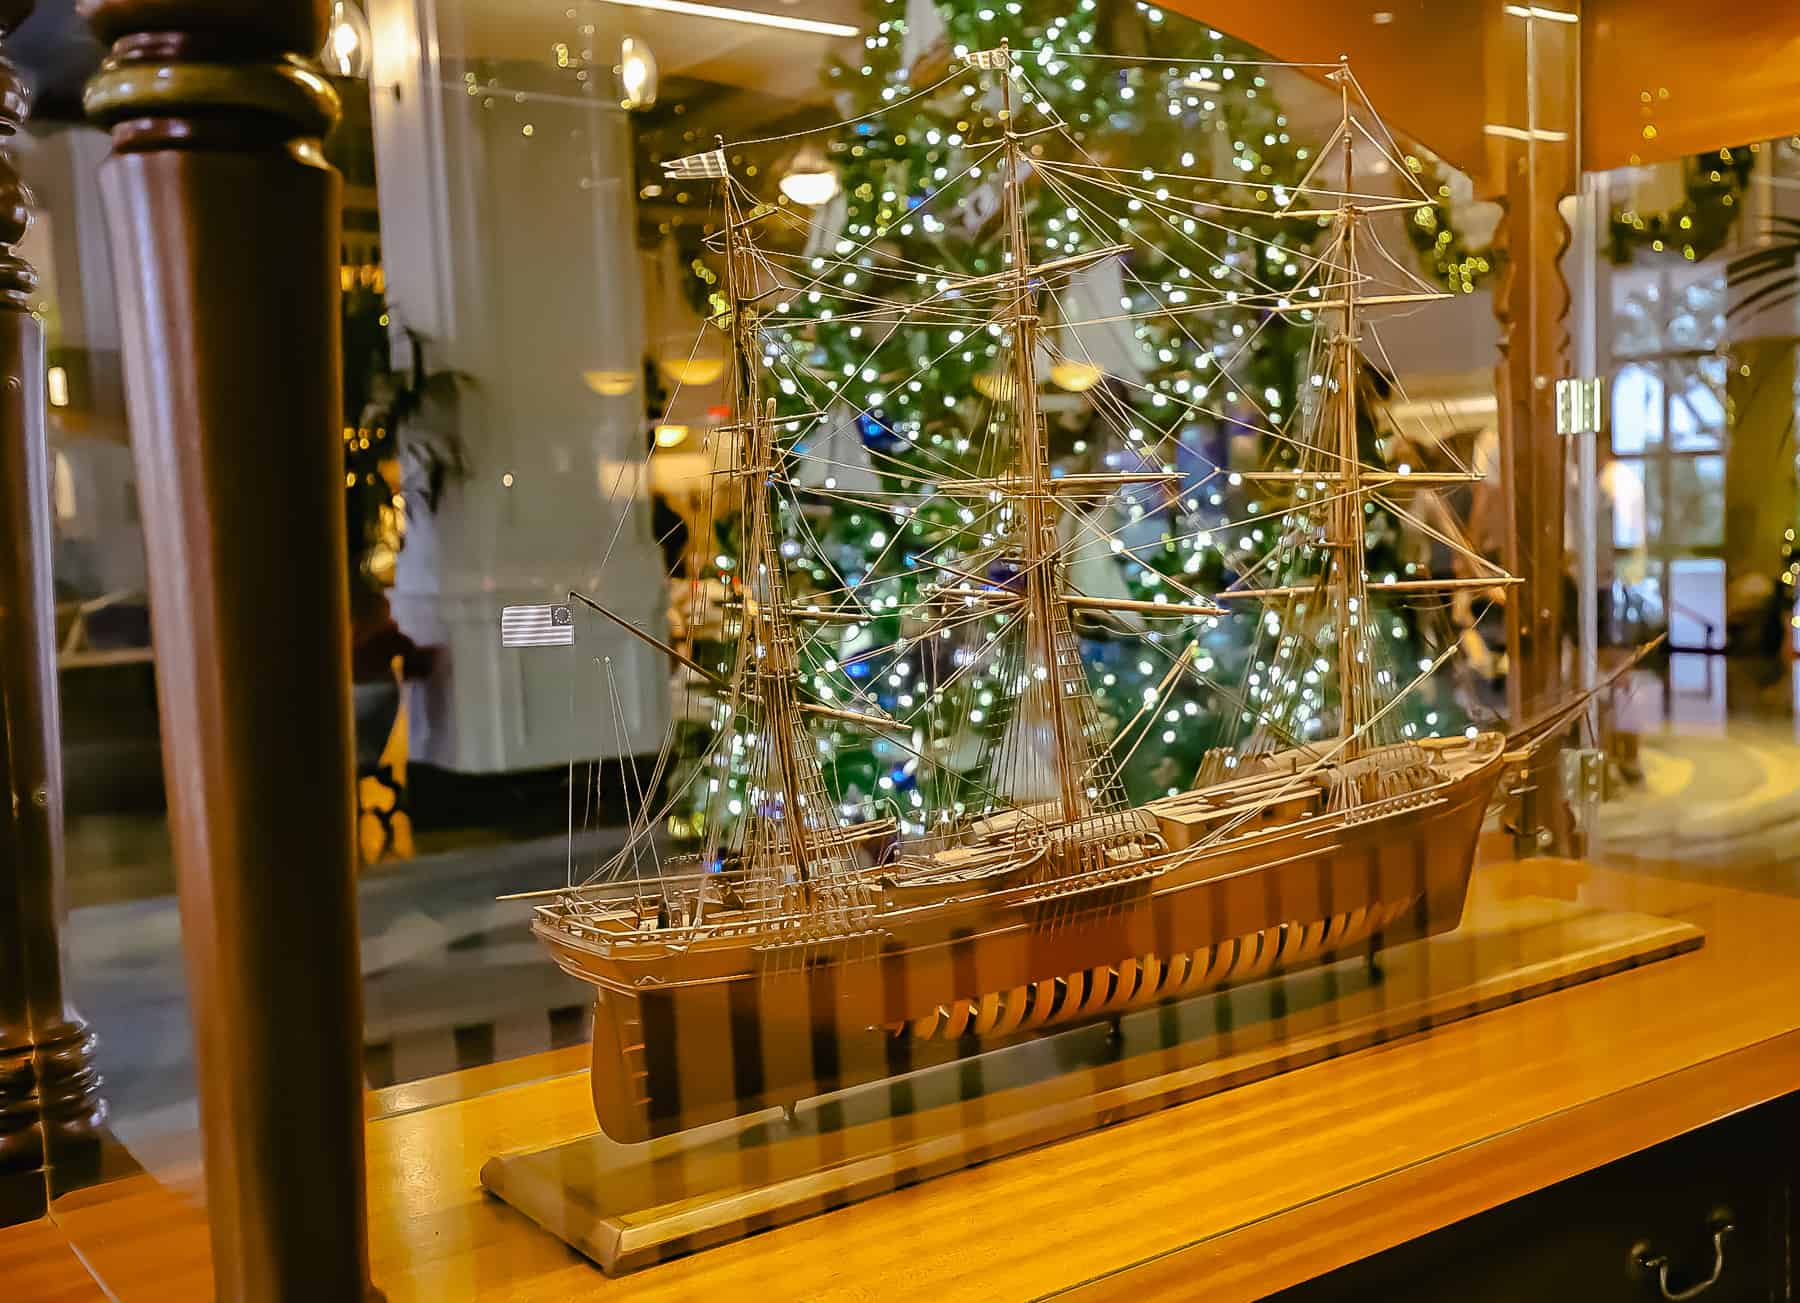 A model ship in a glass case with the lights of the Christmas tree shining behind it. 